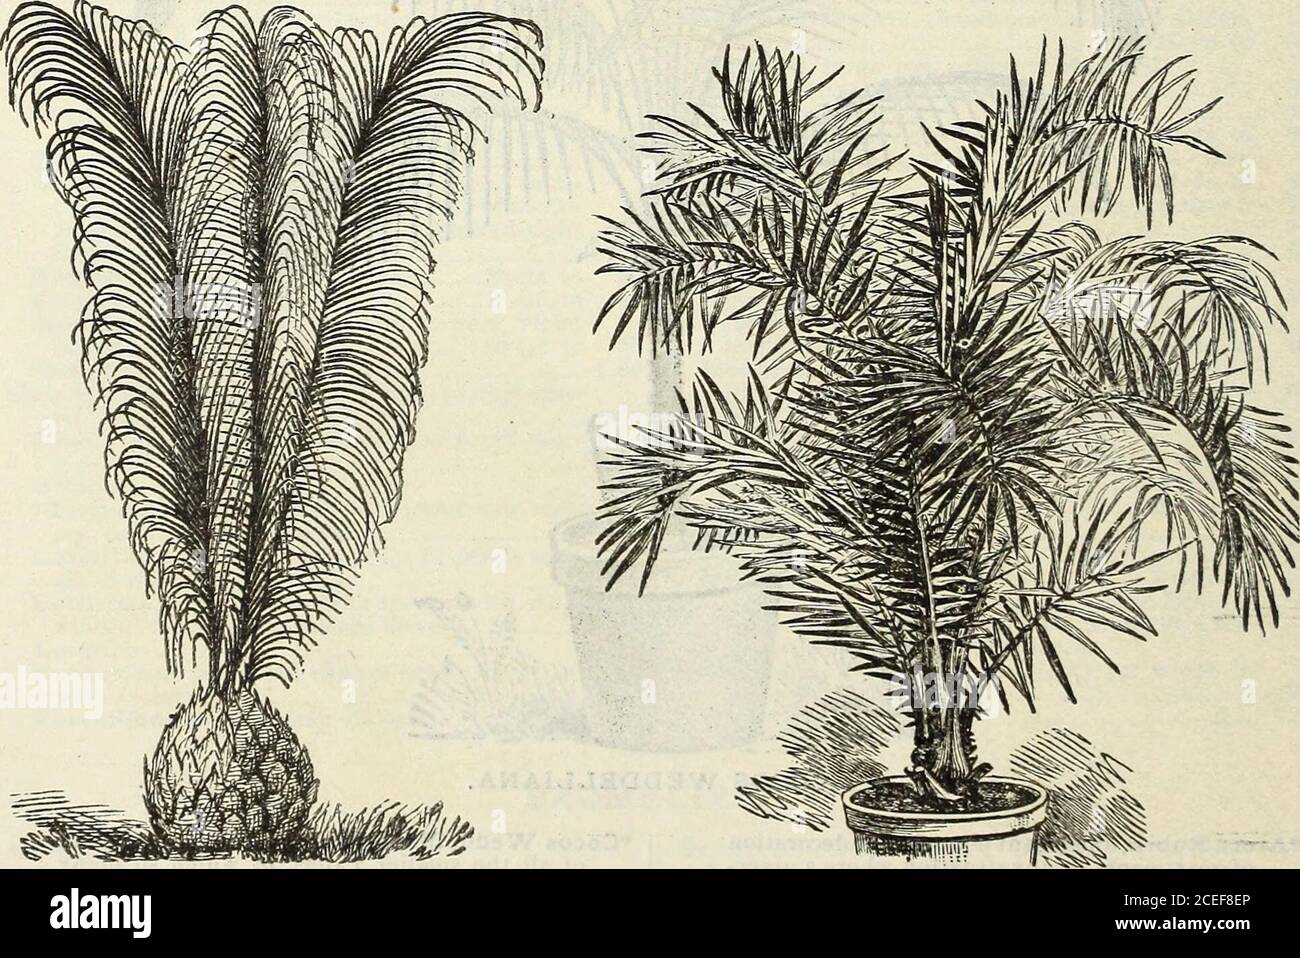 . John Saul's Washington nurseries catalogue of plants for the spring of 1888. PRITCHARDIA FILAMENTOSA. LATANIA BORBONICA.. MACROZAMIA. PHCENIX RECLINATA. *Carypha (Livistonea) Australis, a fan-leavedPalm of great beauty. Being of robust con-stitution, it withstands without injury a lowtemperature; it is well suited for the decora-tion of apartments. The fan-like leaves aredark green, supported upon brown petioles,which are armed at their edges with stoutspines 25 cts., 50 cts., $1.00 to 2 50 =^Macrozamia Denisoni (Peroffskyana), long,graceful pinnated leaves, very beautiful Palm ♦Spiralis, a Stock Photo